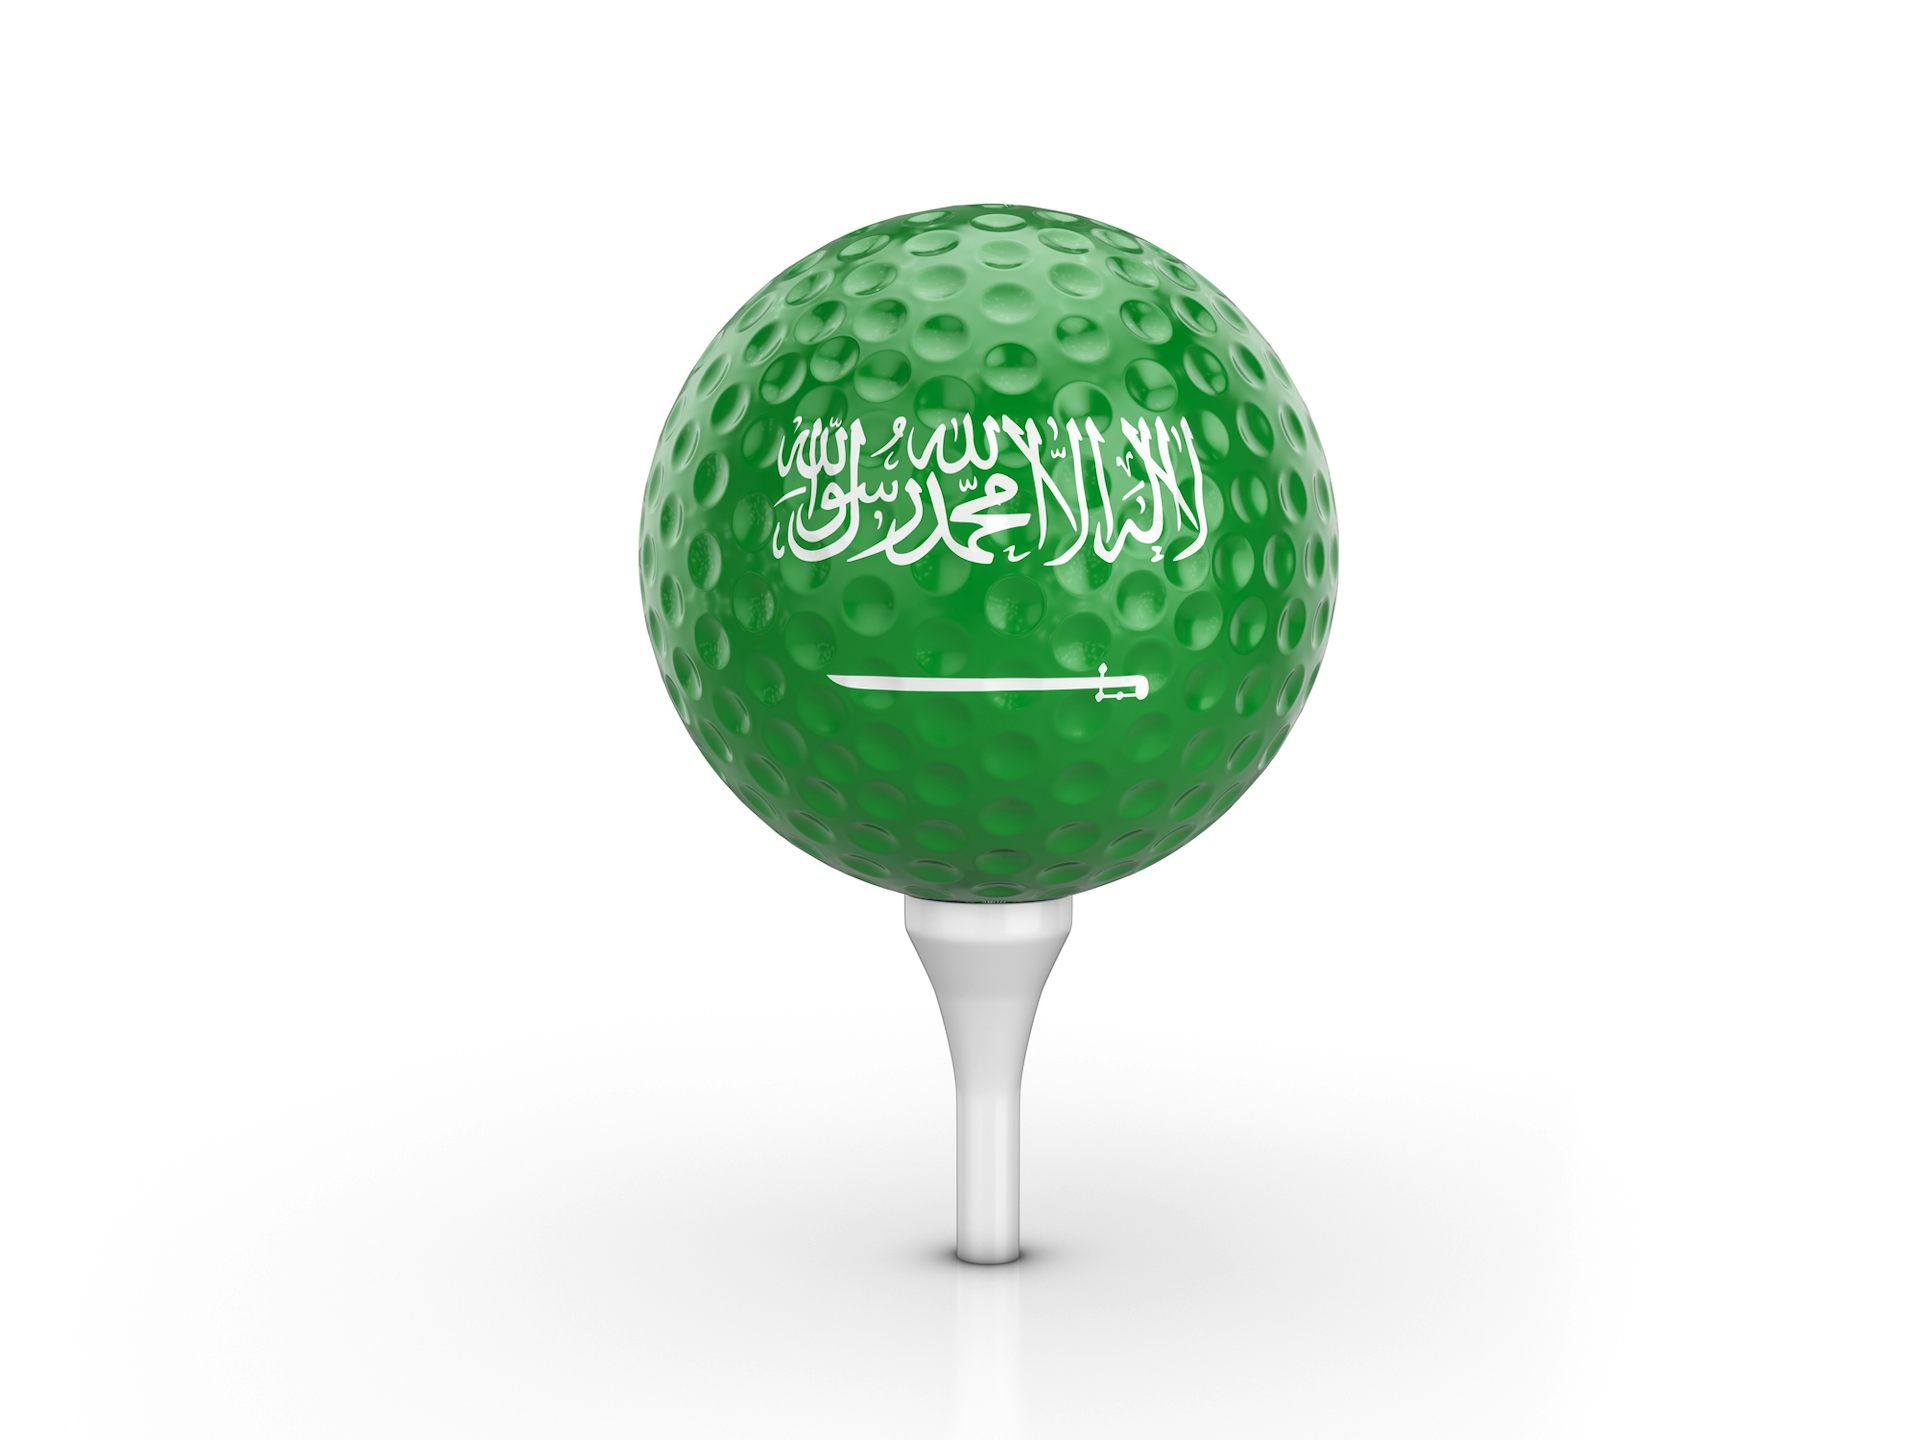 Big Money Bought the PGA Tour, but Can It Make Golf a Popular Sport in Saudi Arabia?